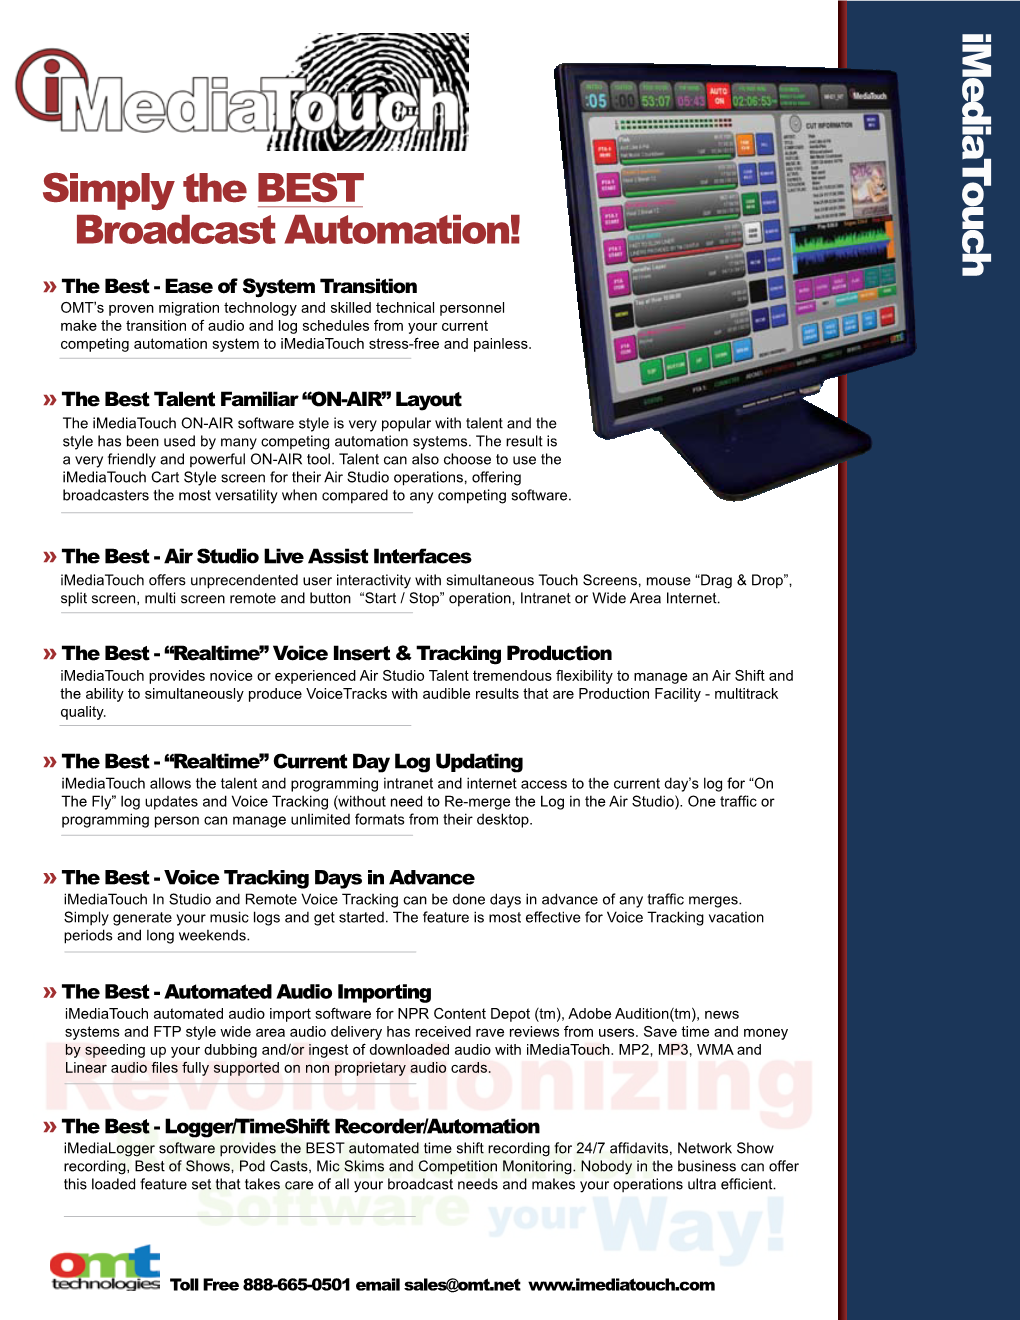 Imediat Ouc H Simply the BEST Broadcast Automation!